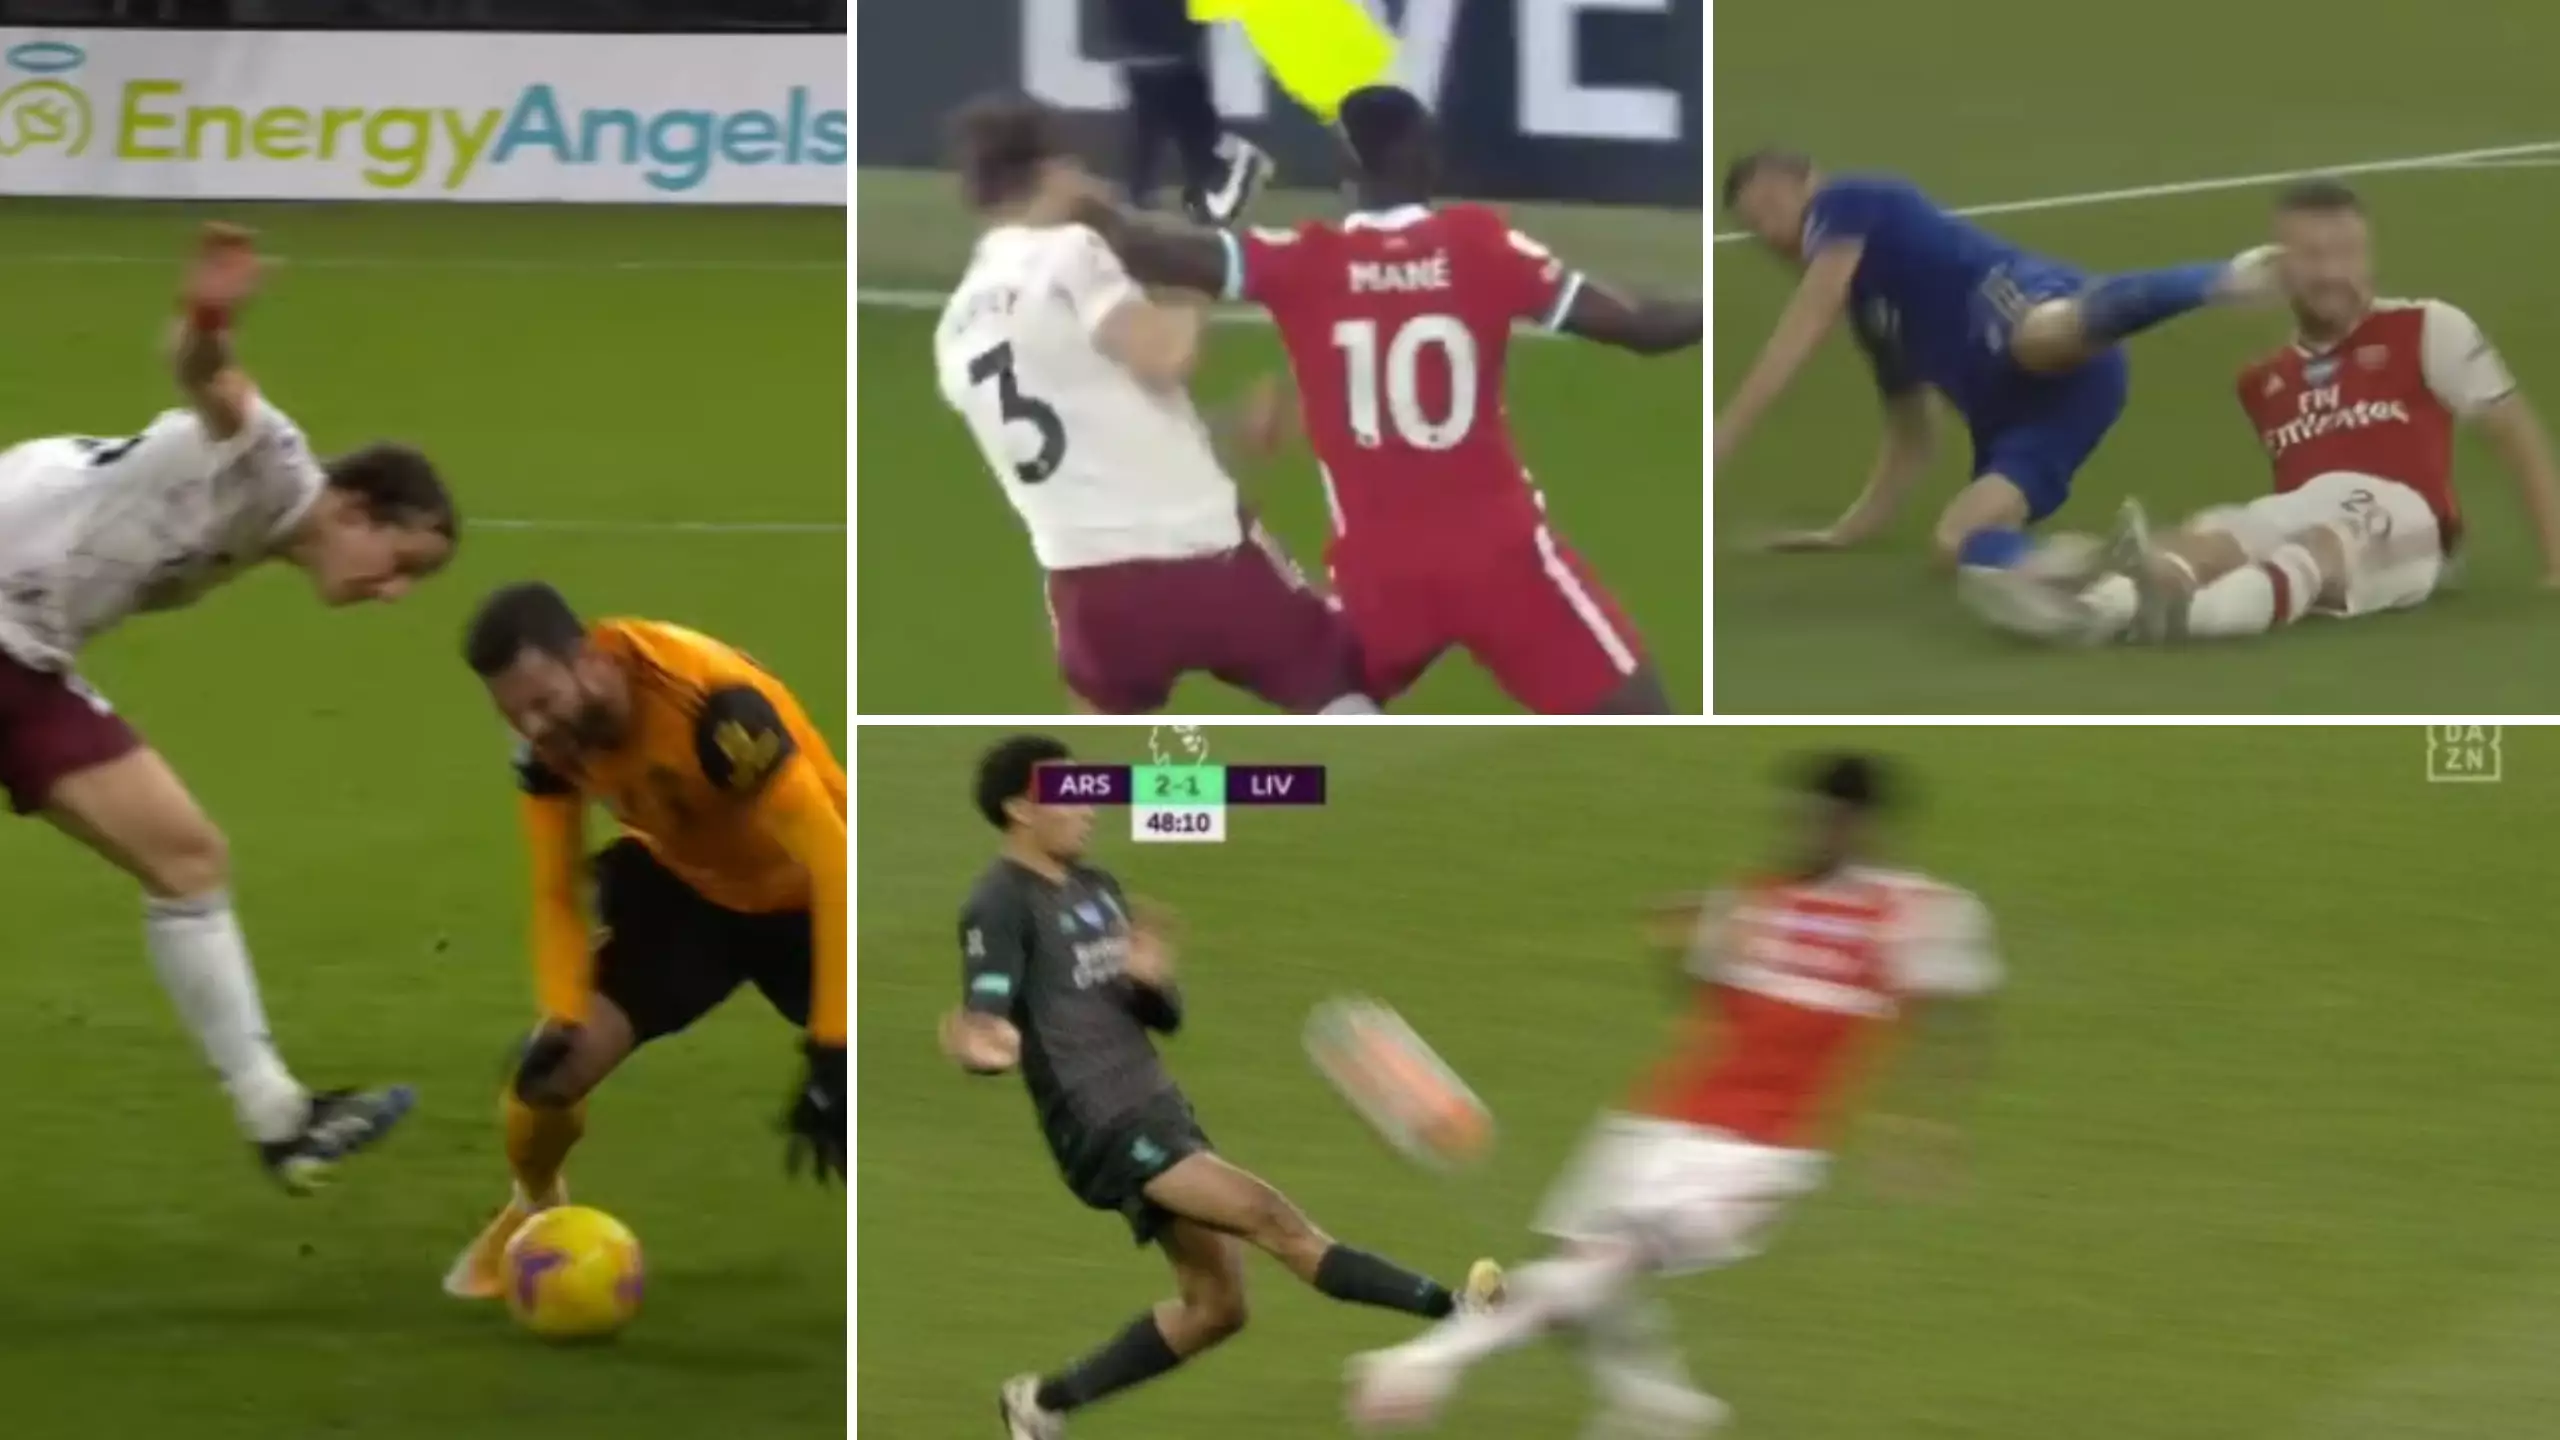 Arsenal Fan's Damning Thread Shows How Many Refereeing Decisions Have Gone Against Them